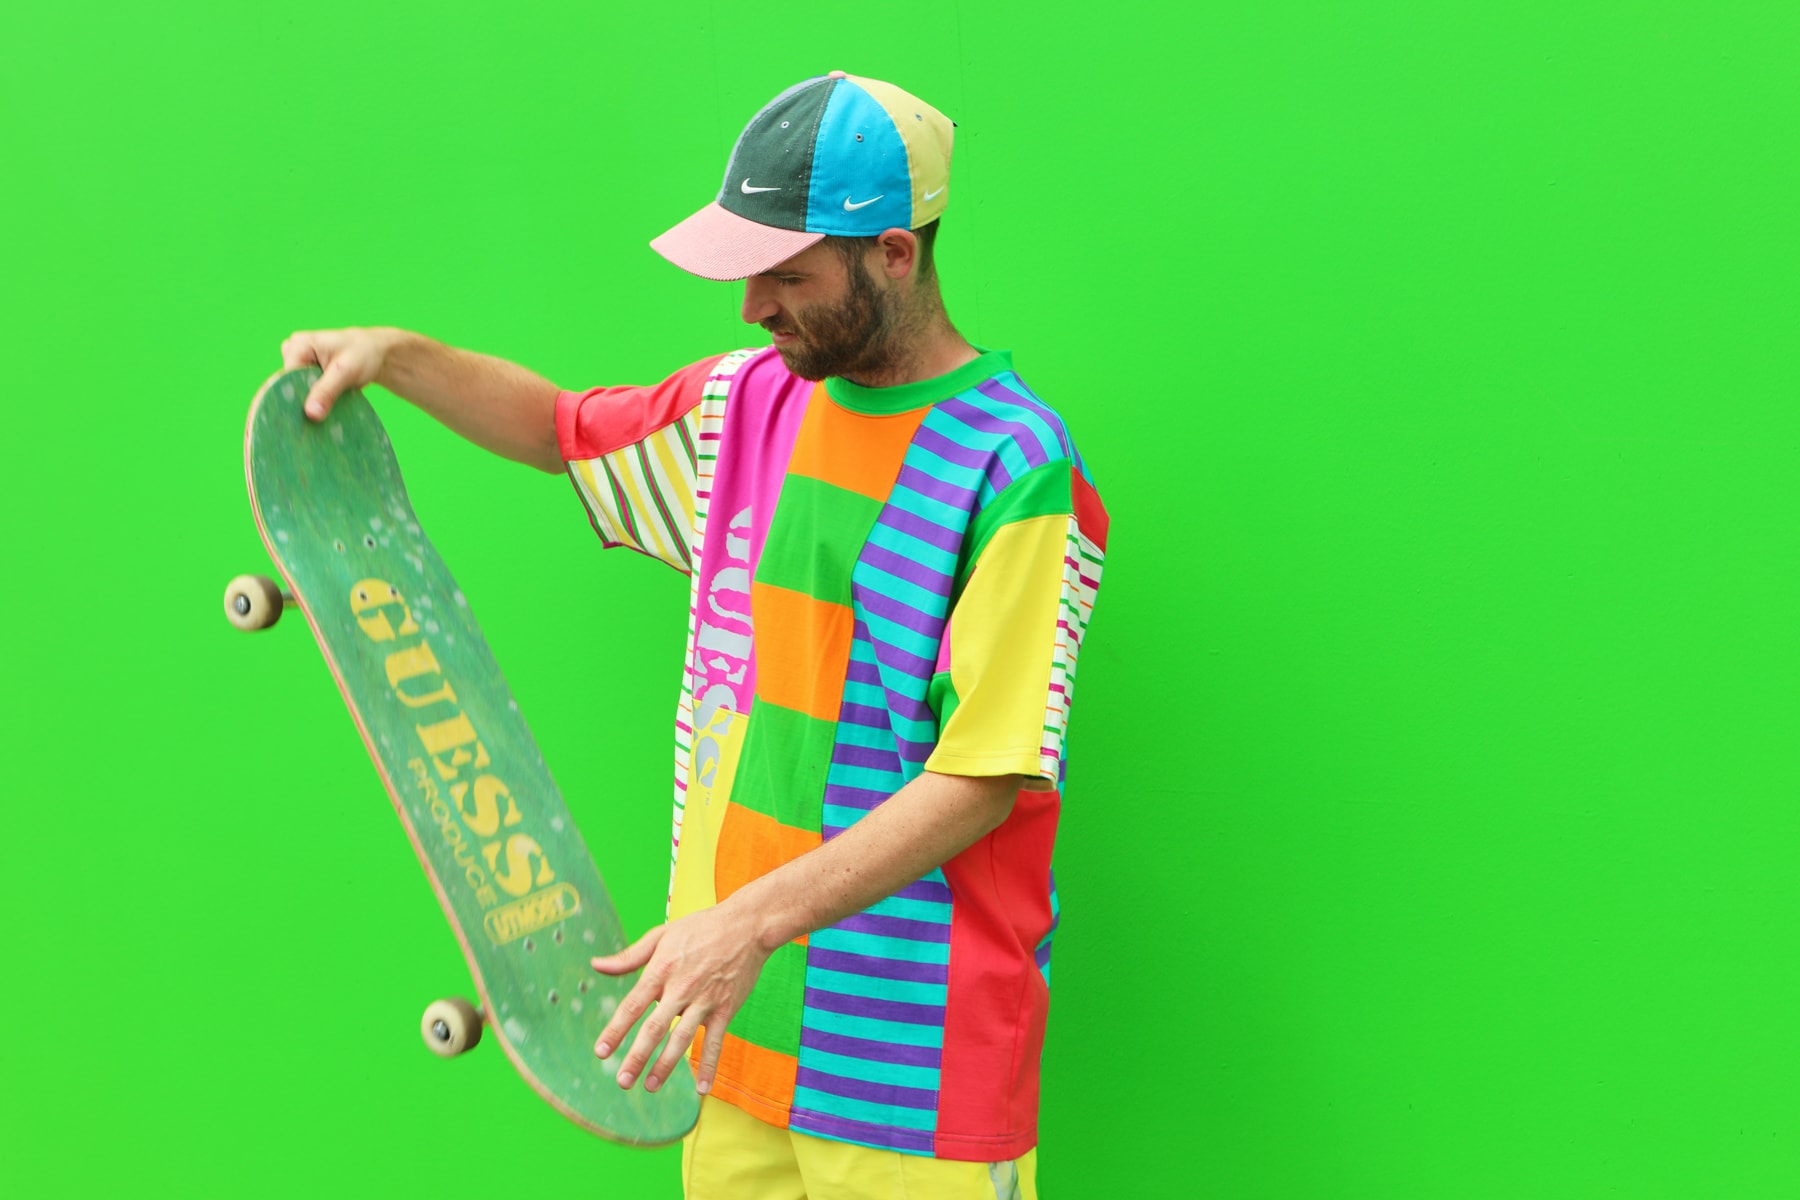 Sean Wotherspoon GUESS Jeans U.S.A. Farmers Market Capsule Collaborative Lookbook